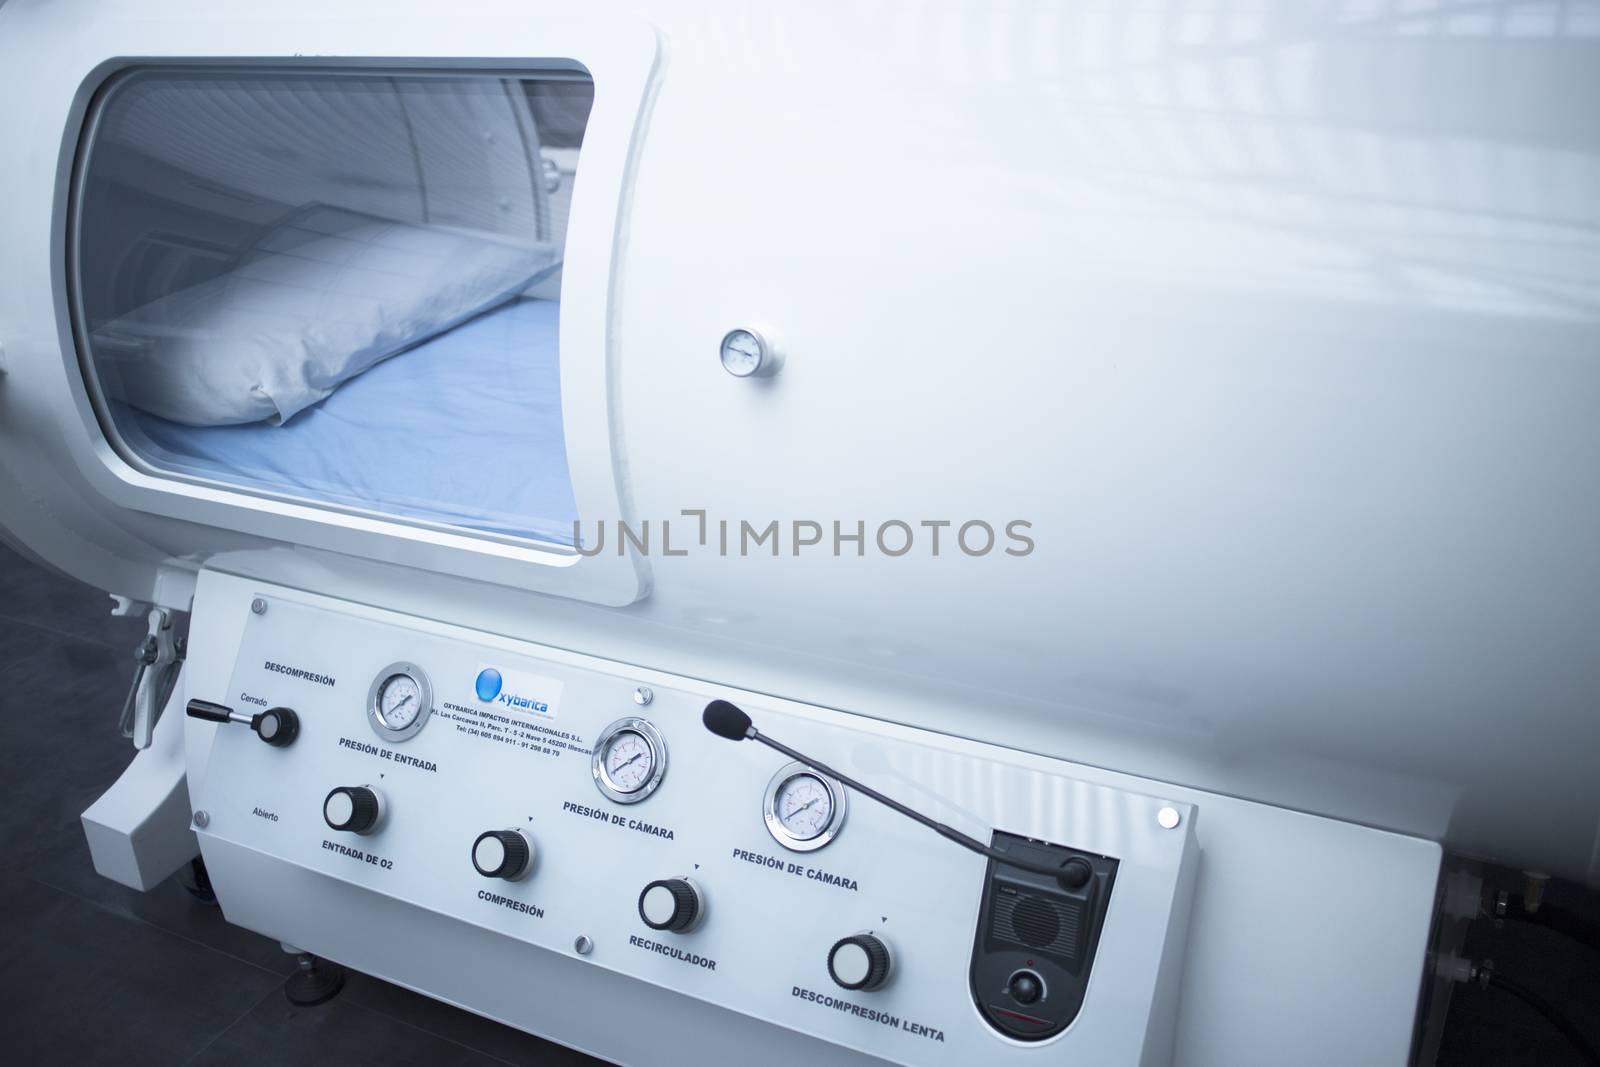 Hyperbaric Oxygen Therapy (HBOT) chamber tank used for specialised medical treatment for injuries in hospital clinic. Exterior viewing window with pillow and bed inside. 